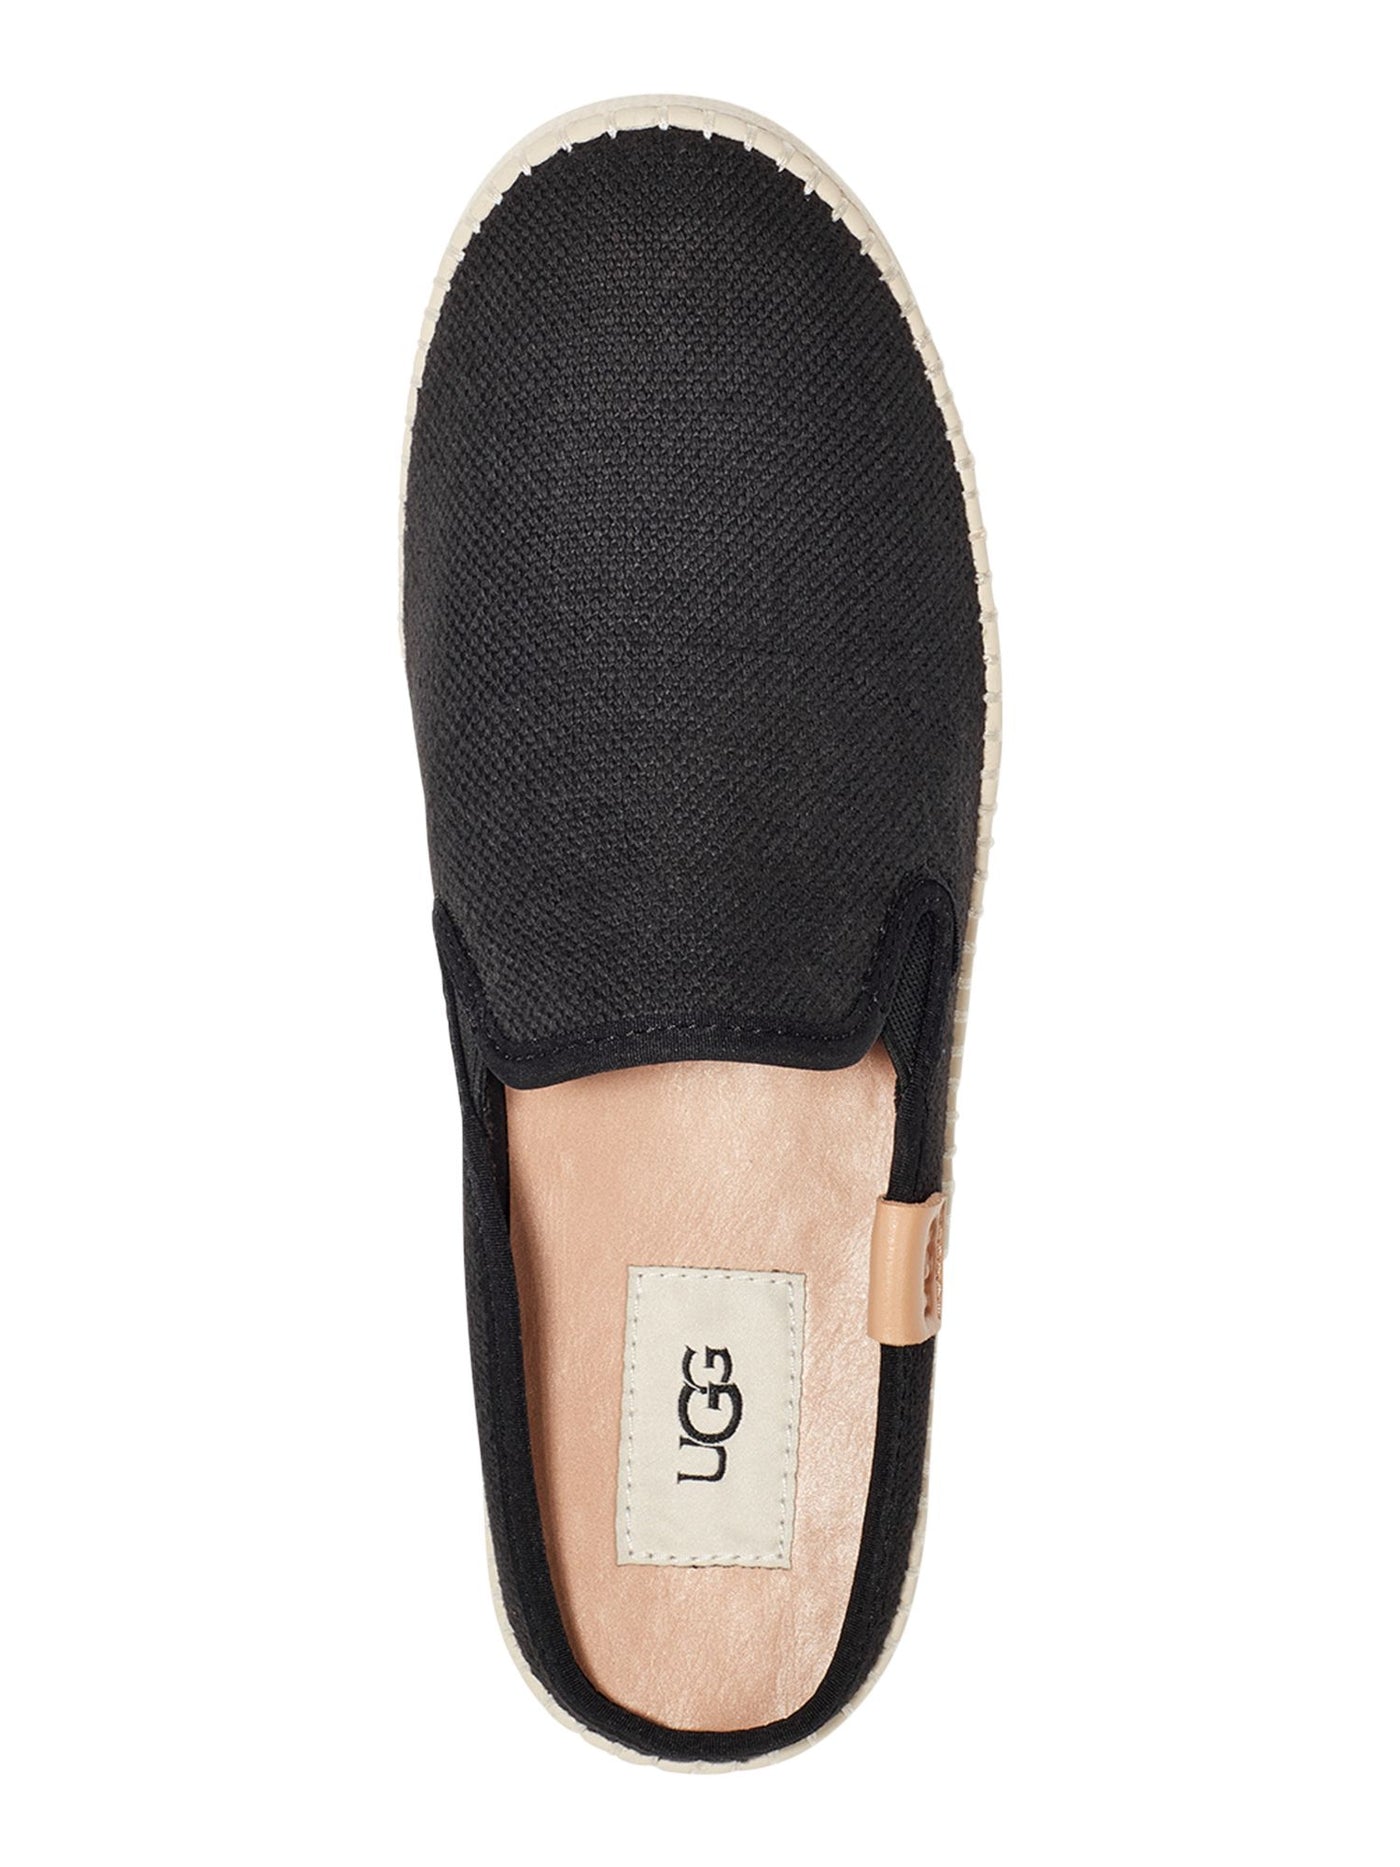 UGG Womens Black Goring Removable Insole Cushioned Delu Round Toe Platform Slip On Mules 6.5